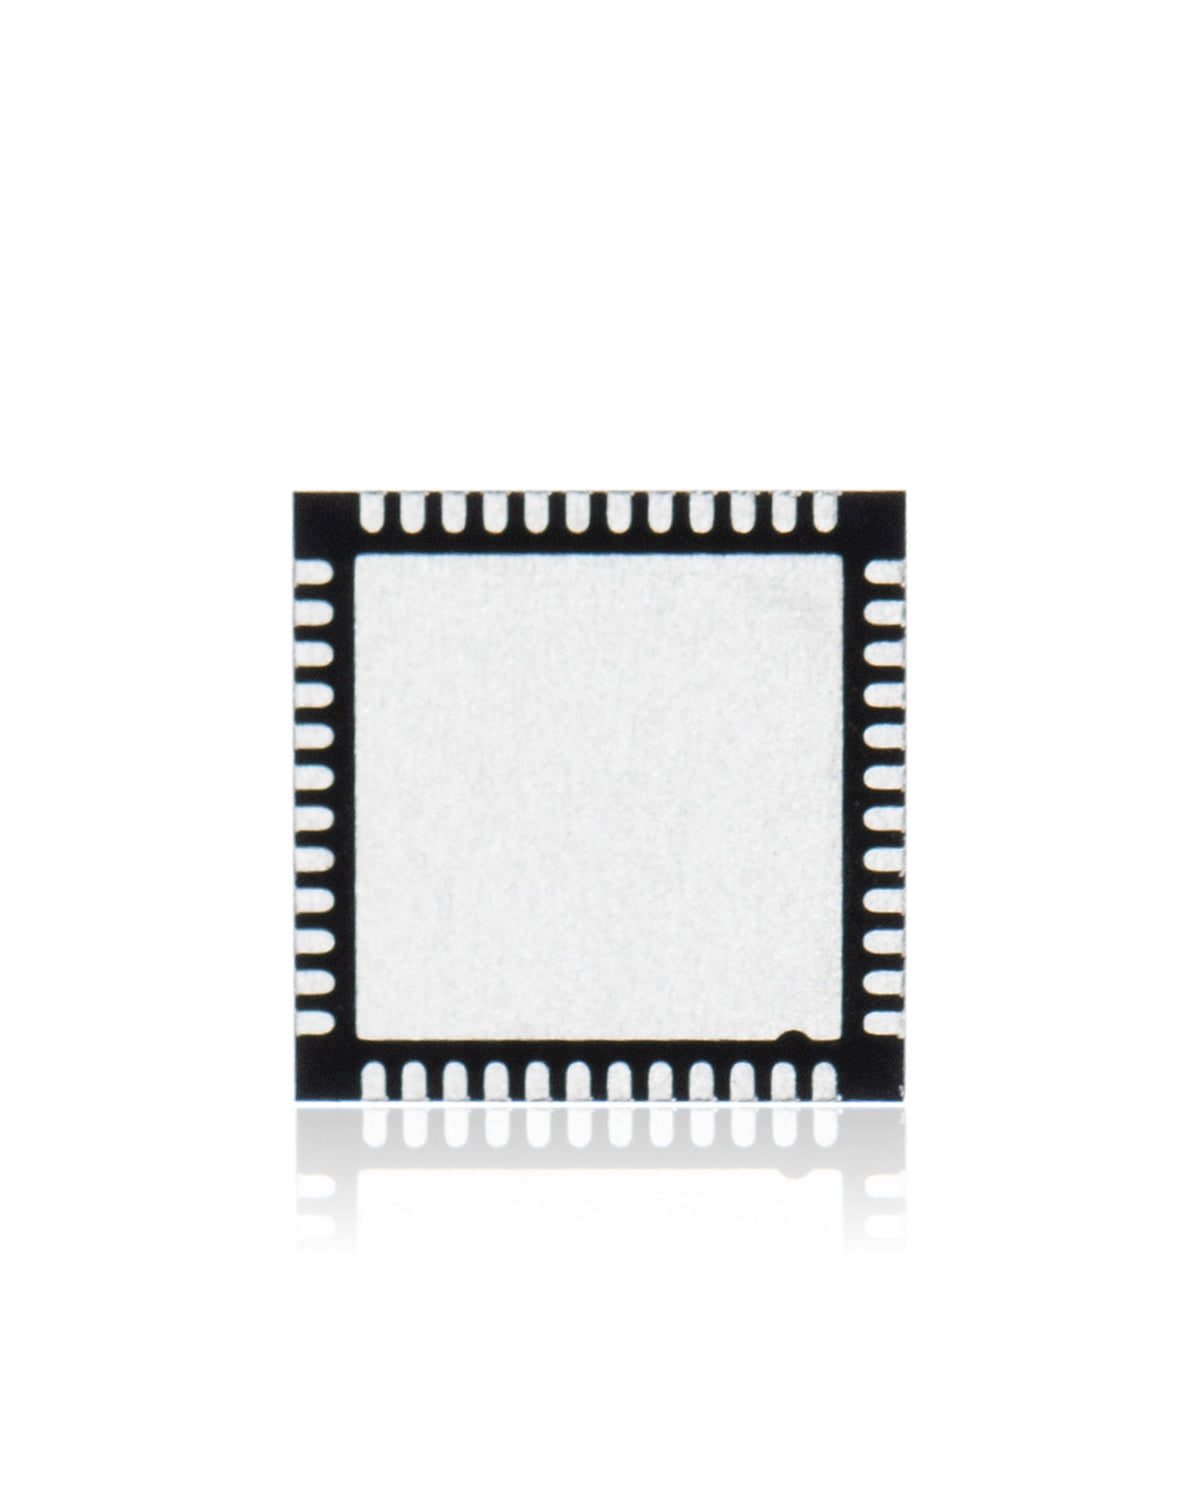 SMALL POWER IC FOR IPAD PRO 12.9" 1ST GEN (2015) / 2ND GEN (2017) / IPAD PRO 9.7" (343S00025-A1)